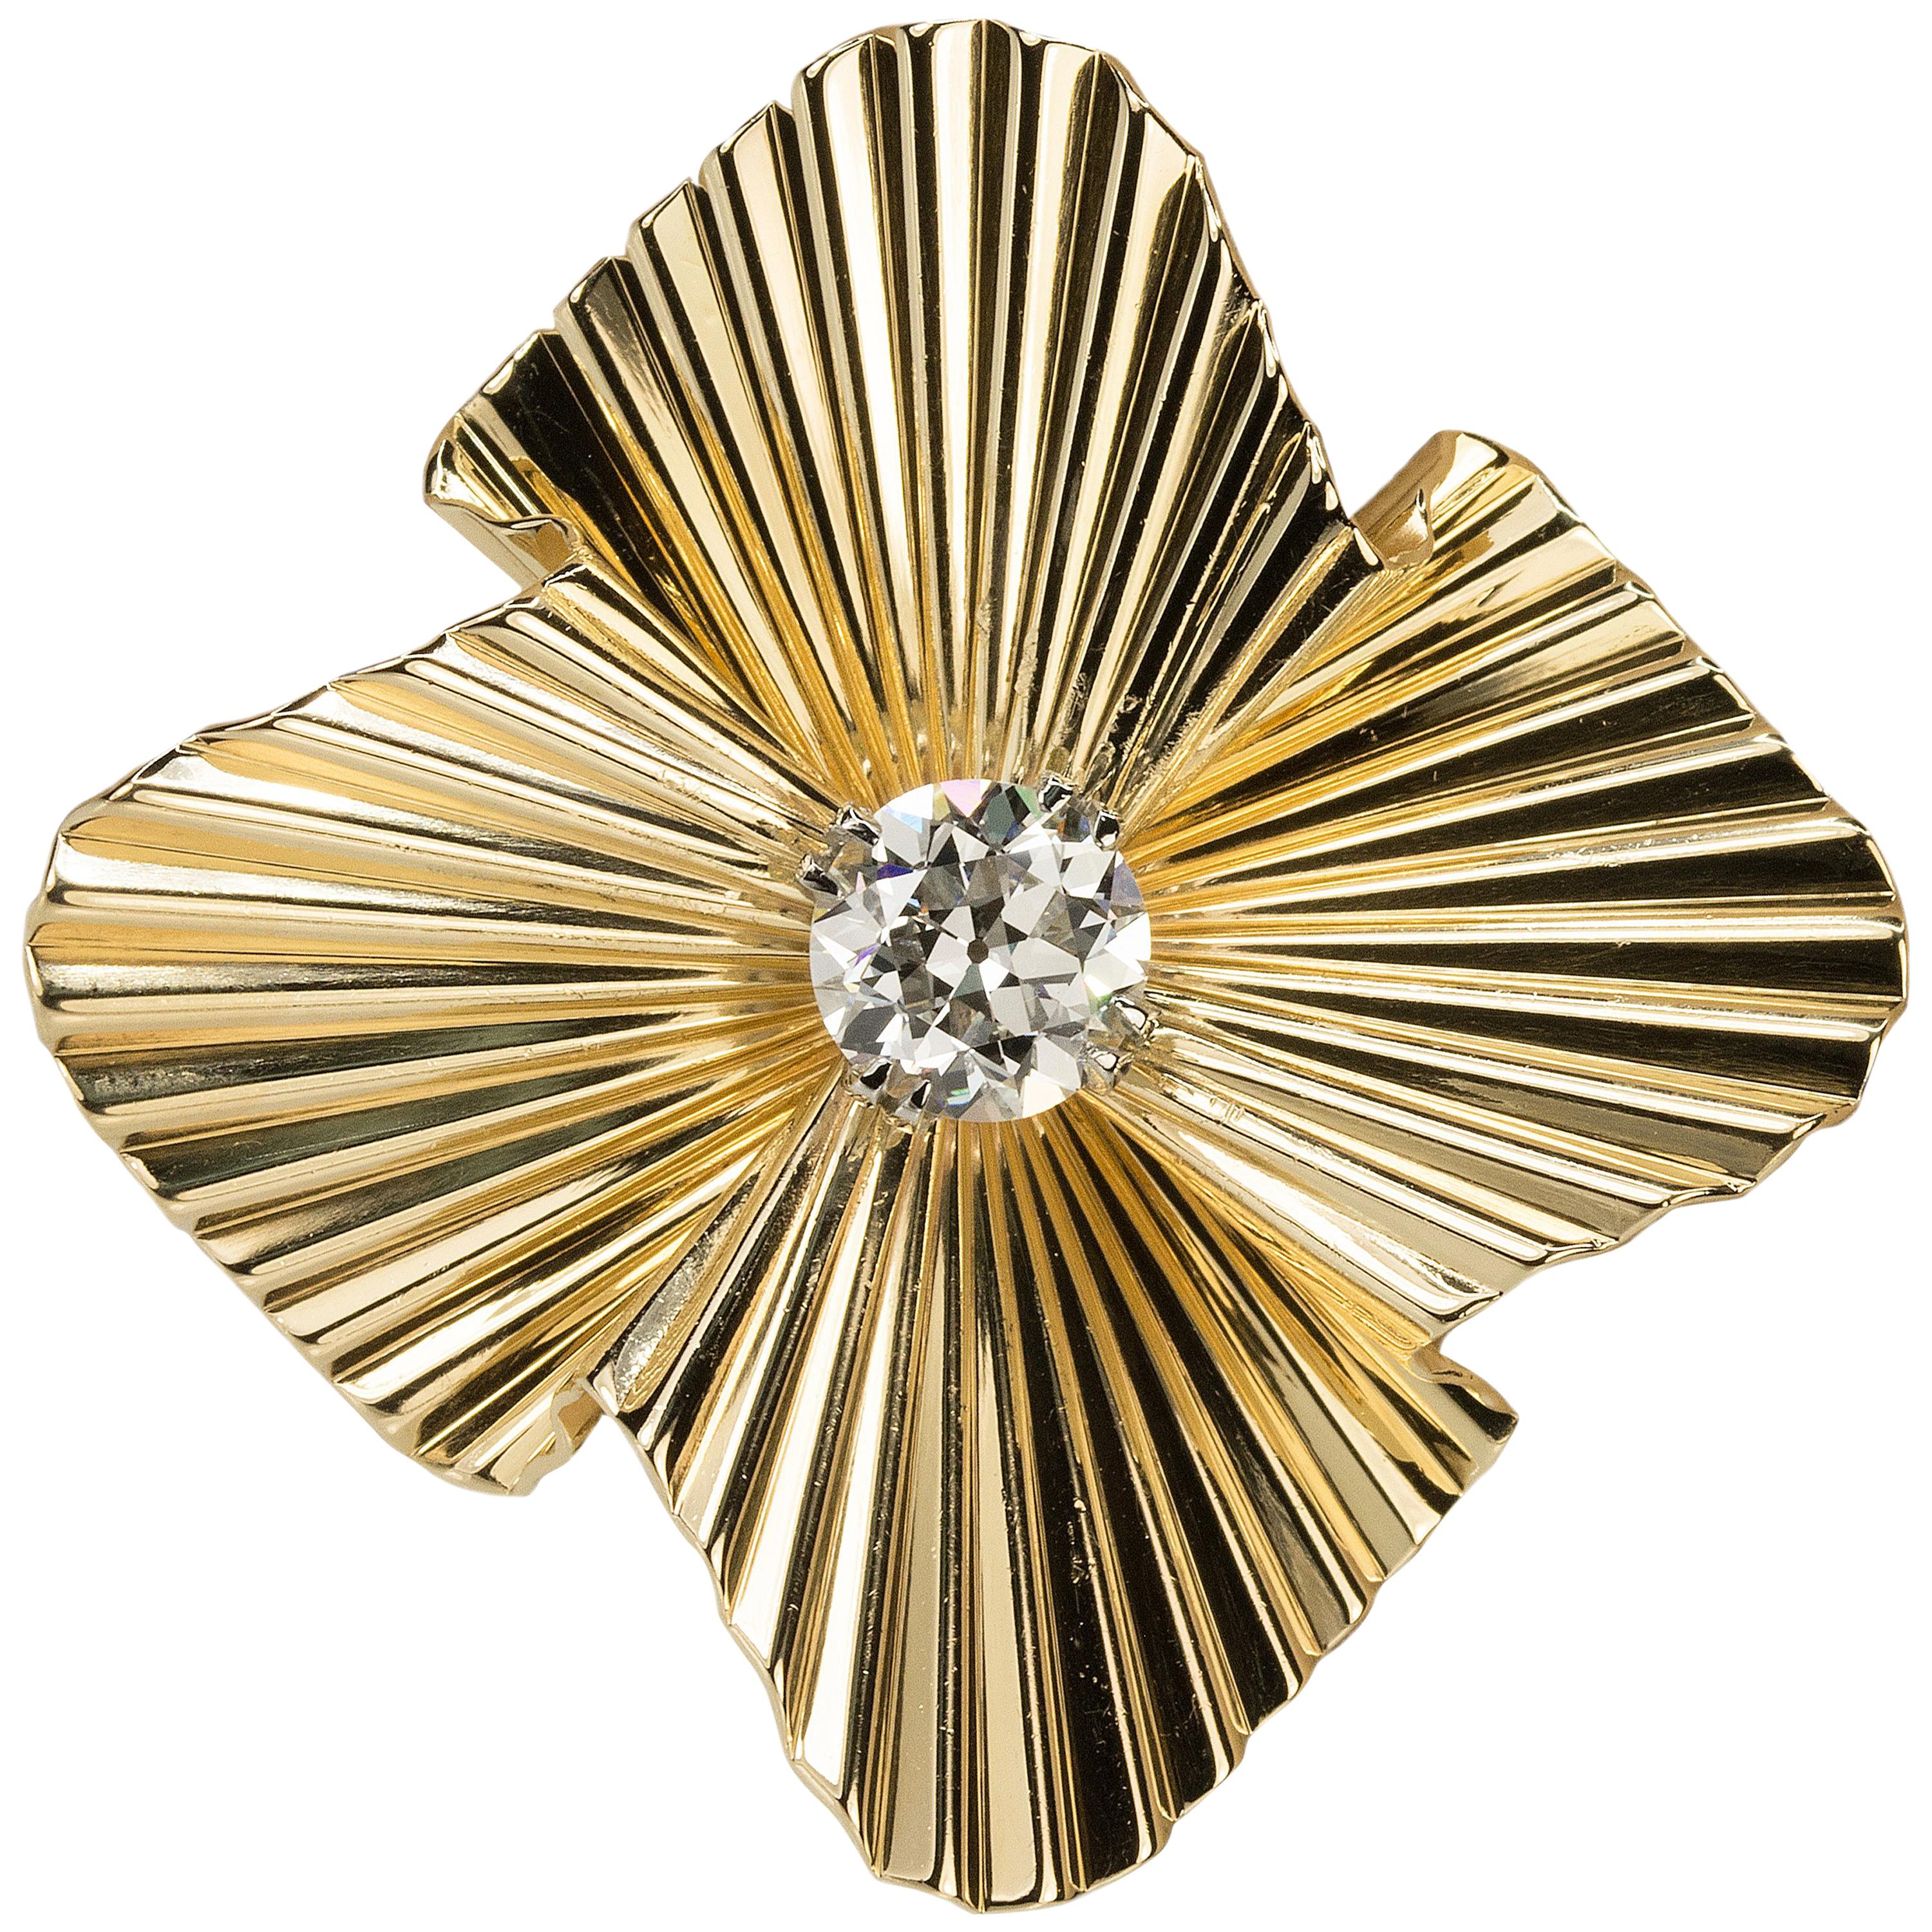 Stunning "Retro" Period Tiffany & Co. Brooch with GIA Certified Diamond For Sale